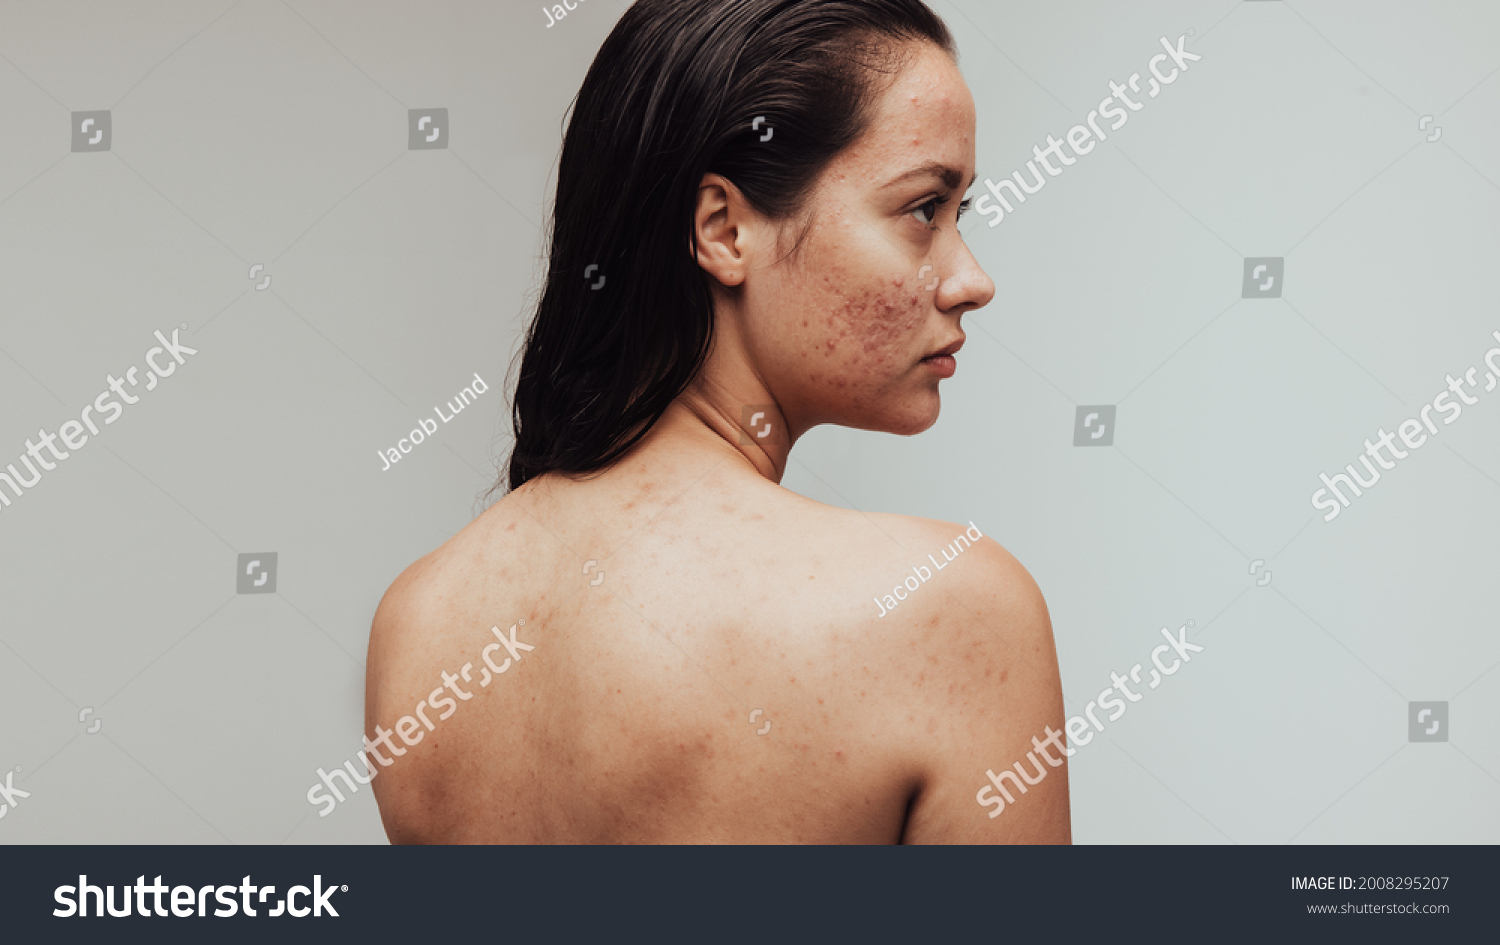 Portrait of woman having acne inflammation on face and body. Rear view close up of woman with pimples on face. #2008295207